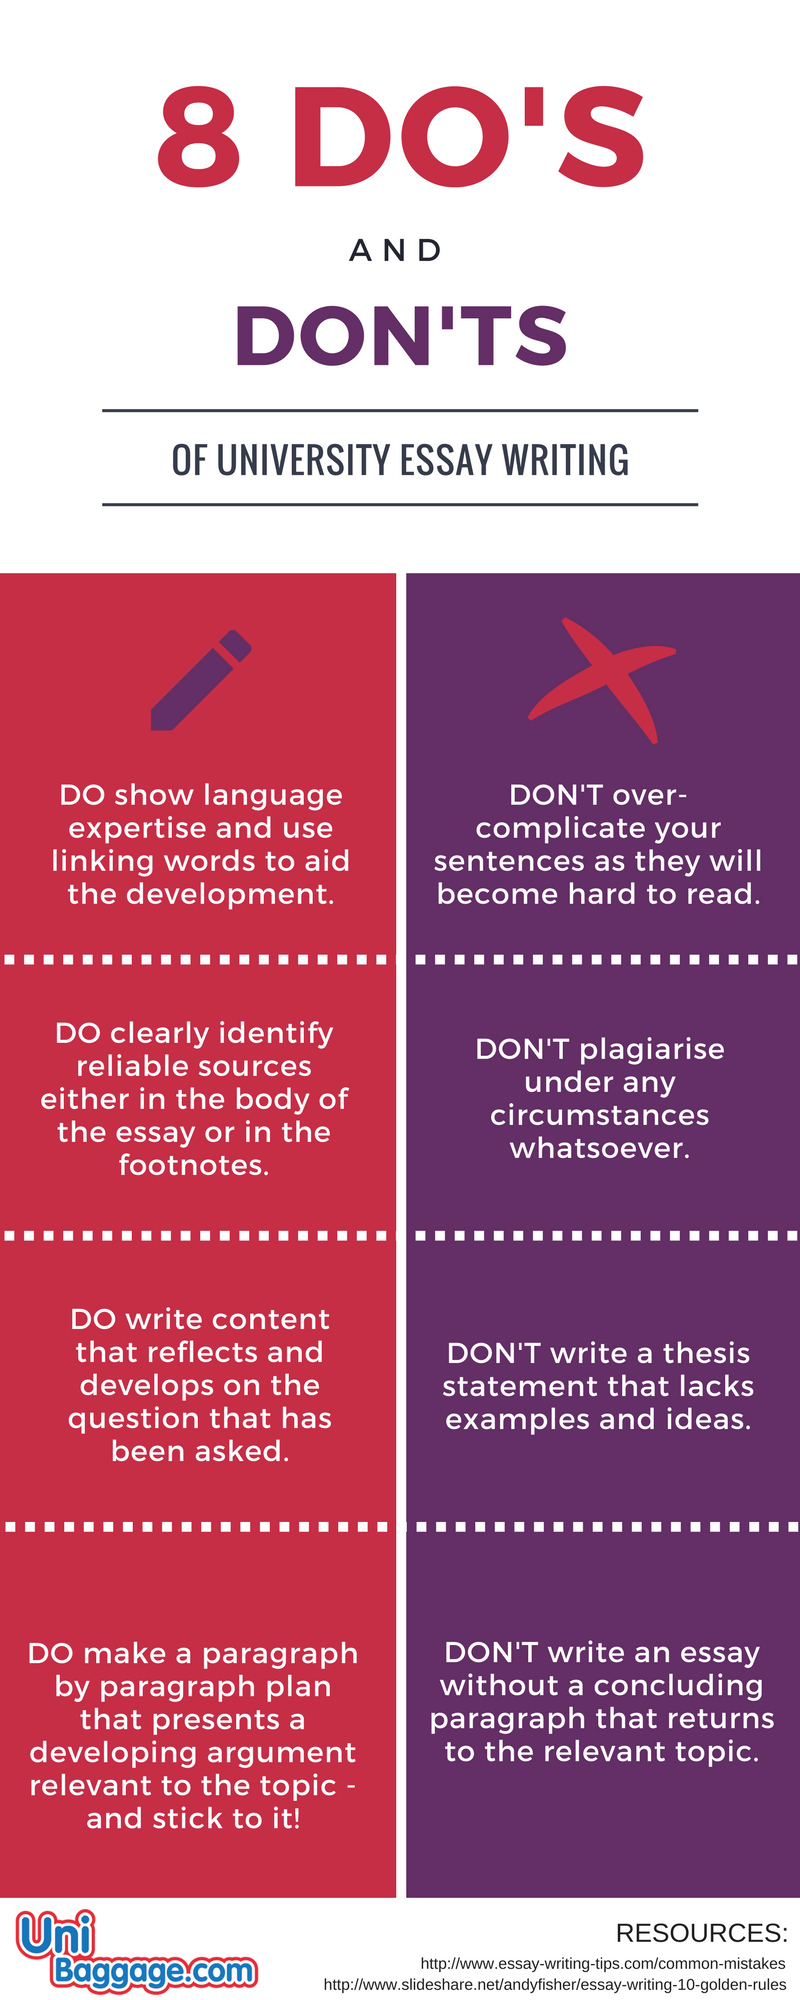 opinion essay dos and don'ts